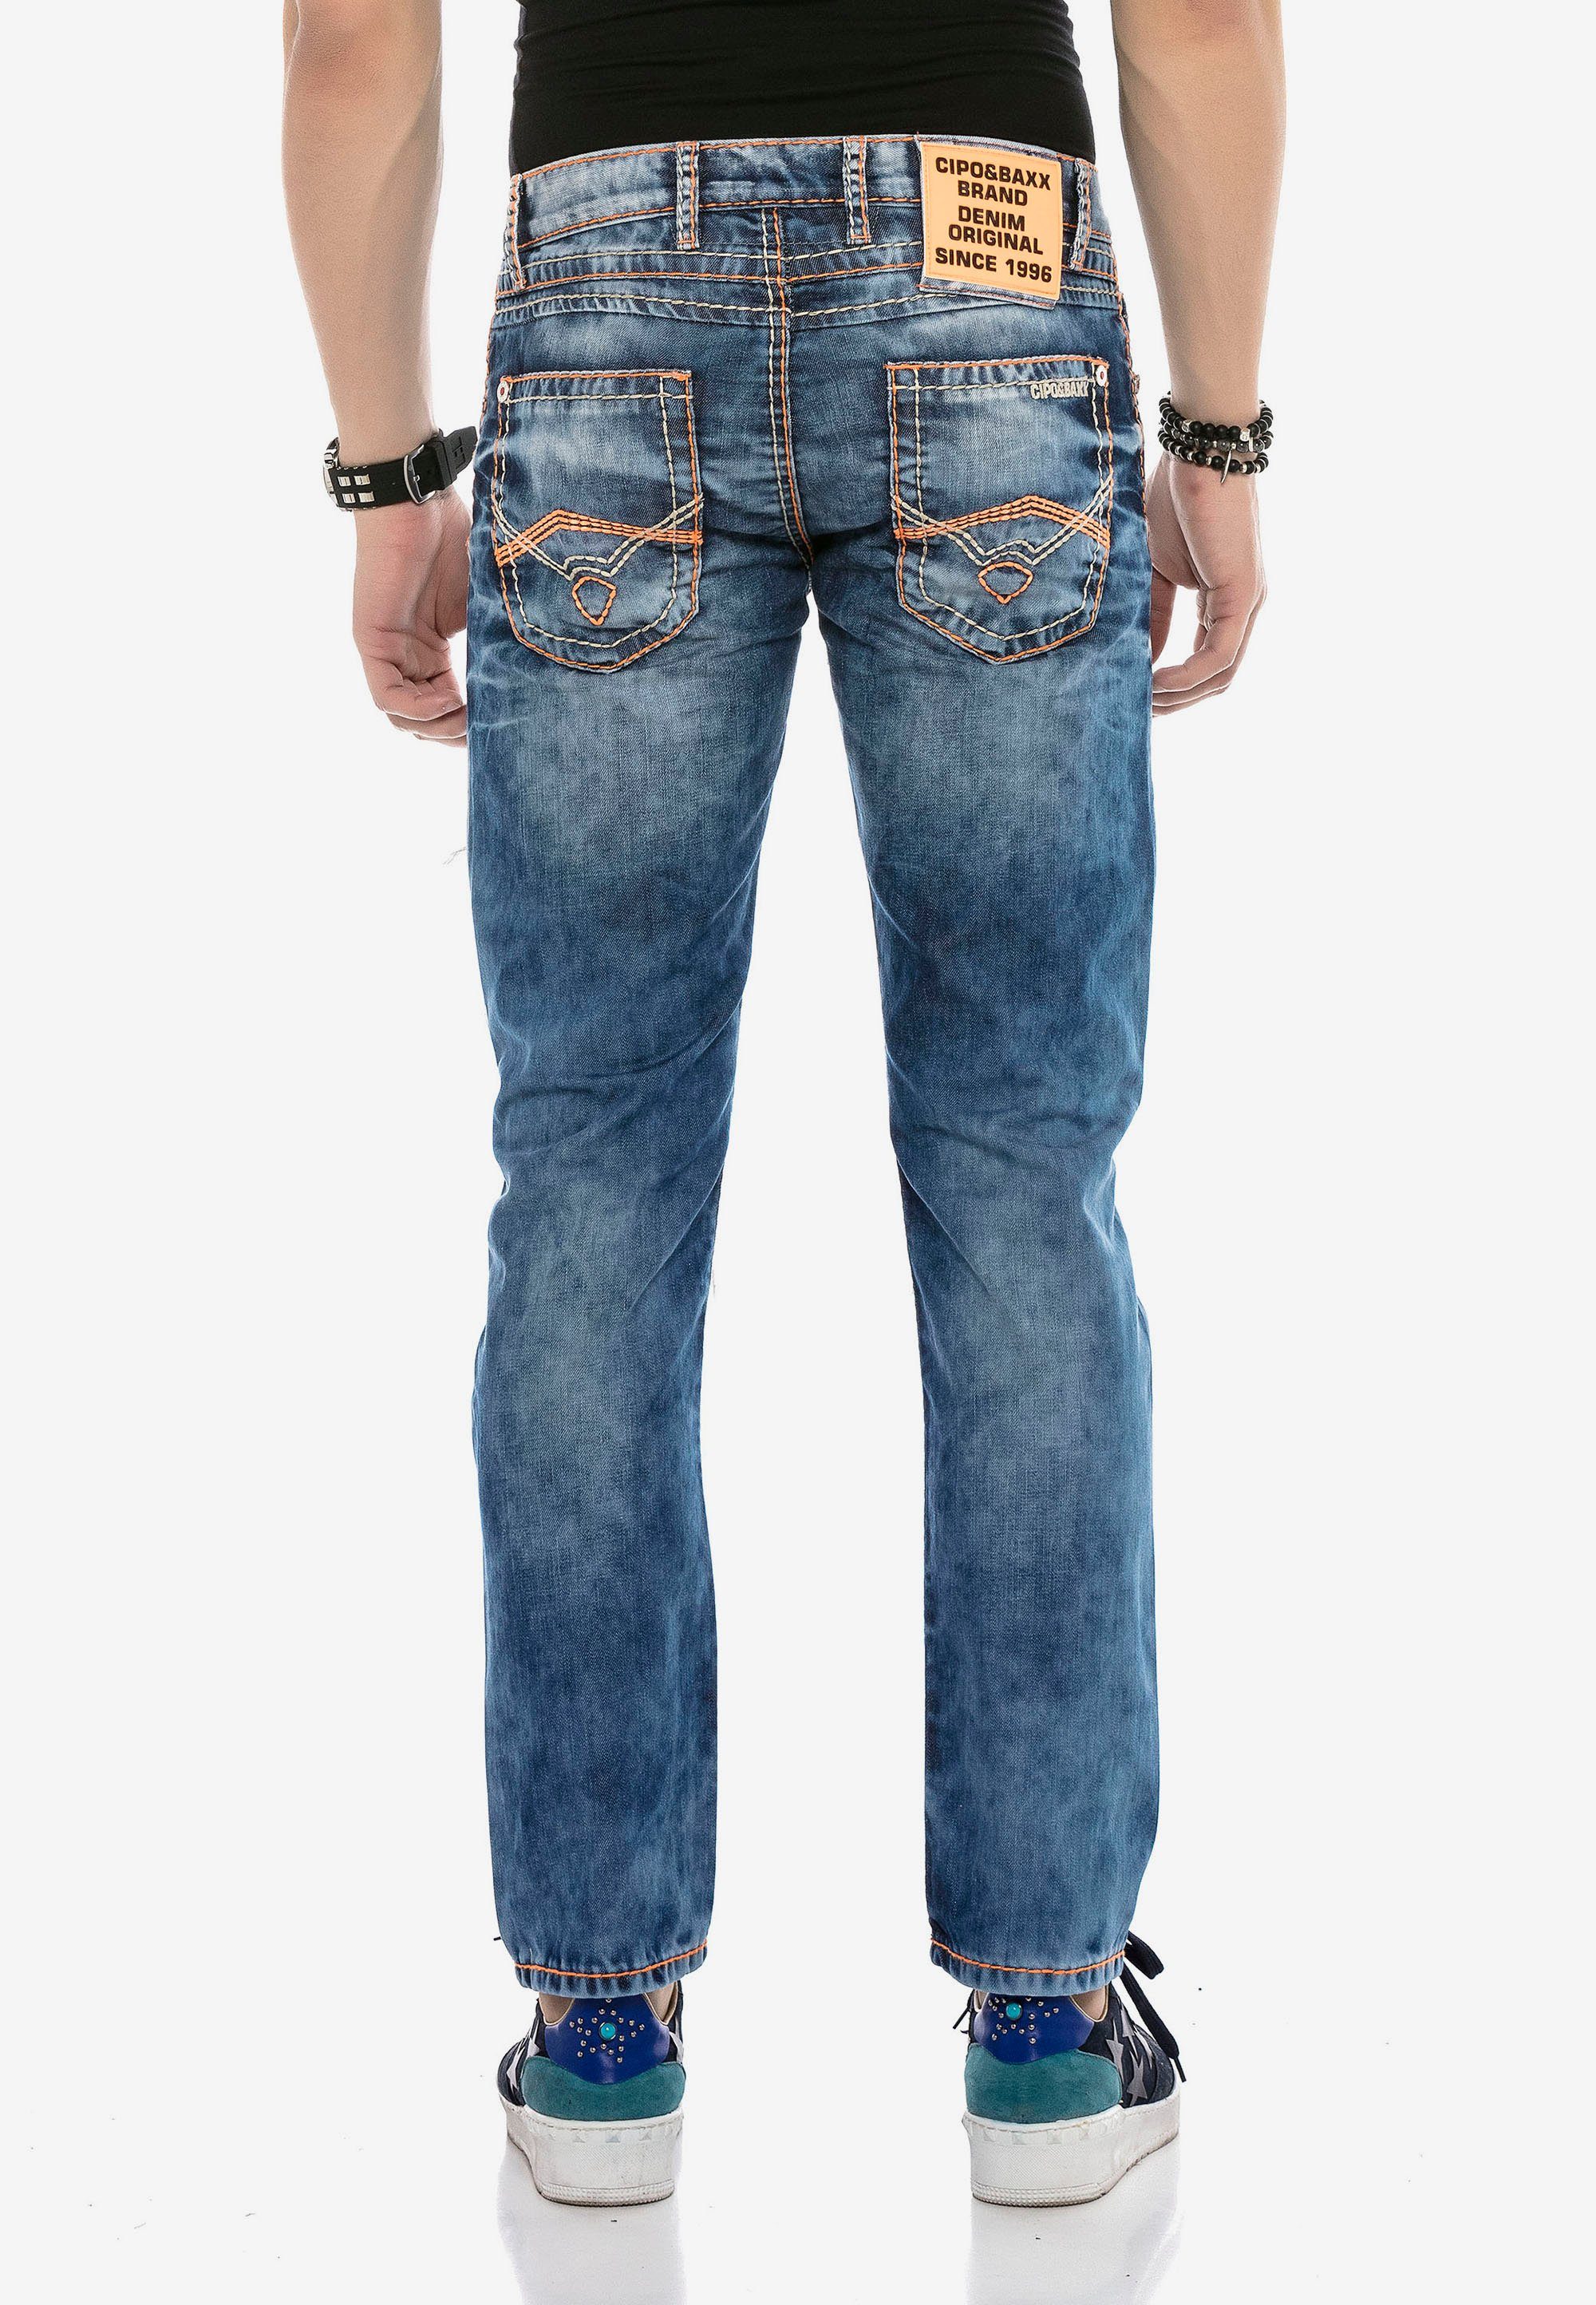 Bequeme Baxx Cipo im & Destroyed-Look Jeans